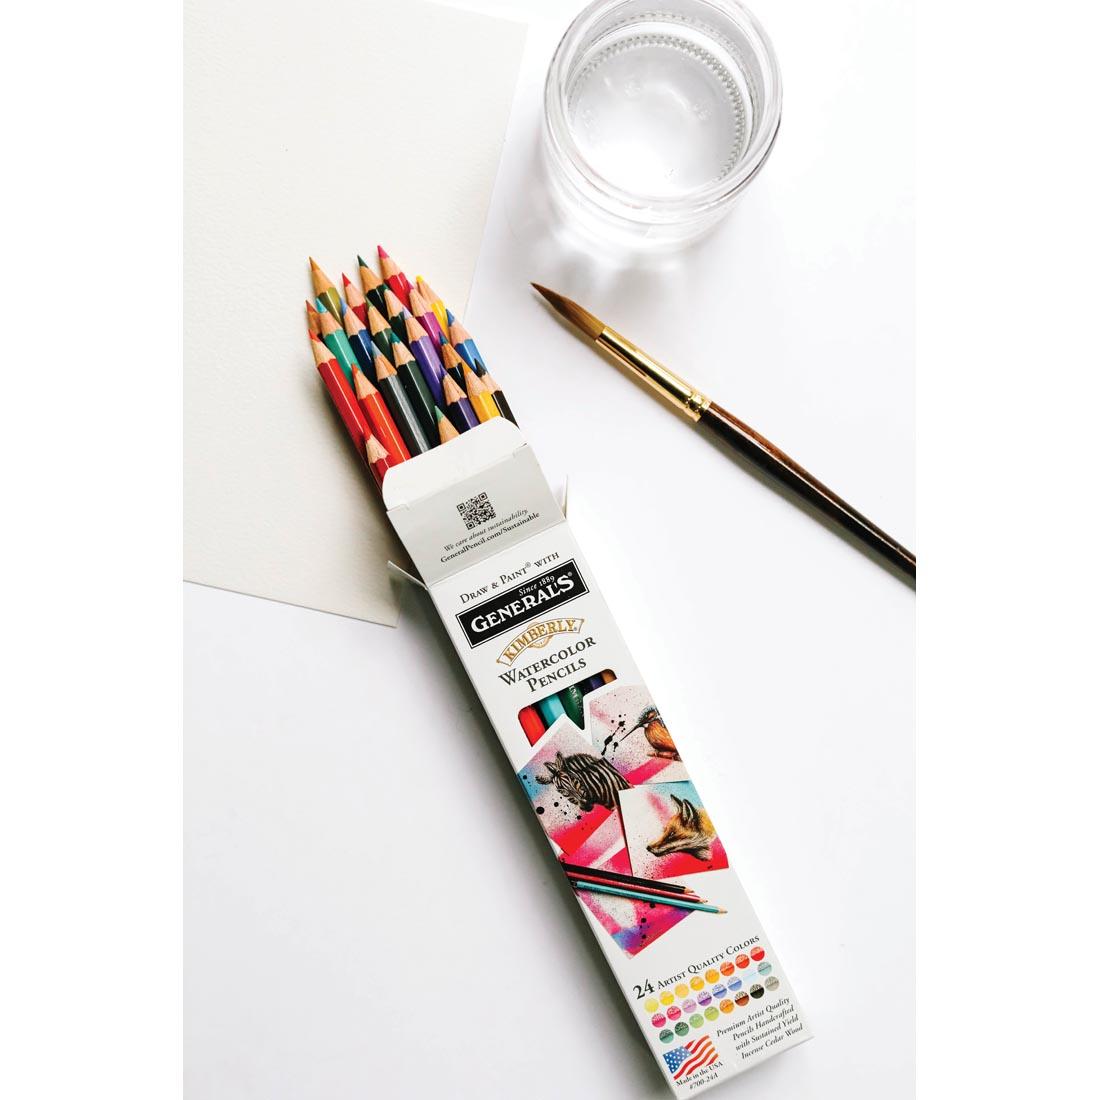 General's Kimberly Watercolor Pencils 24-Color Set, shown with brush and water cup